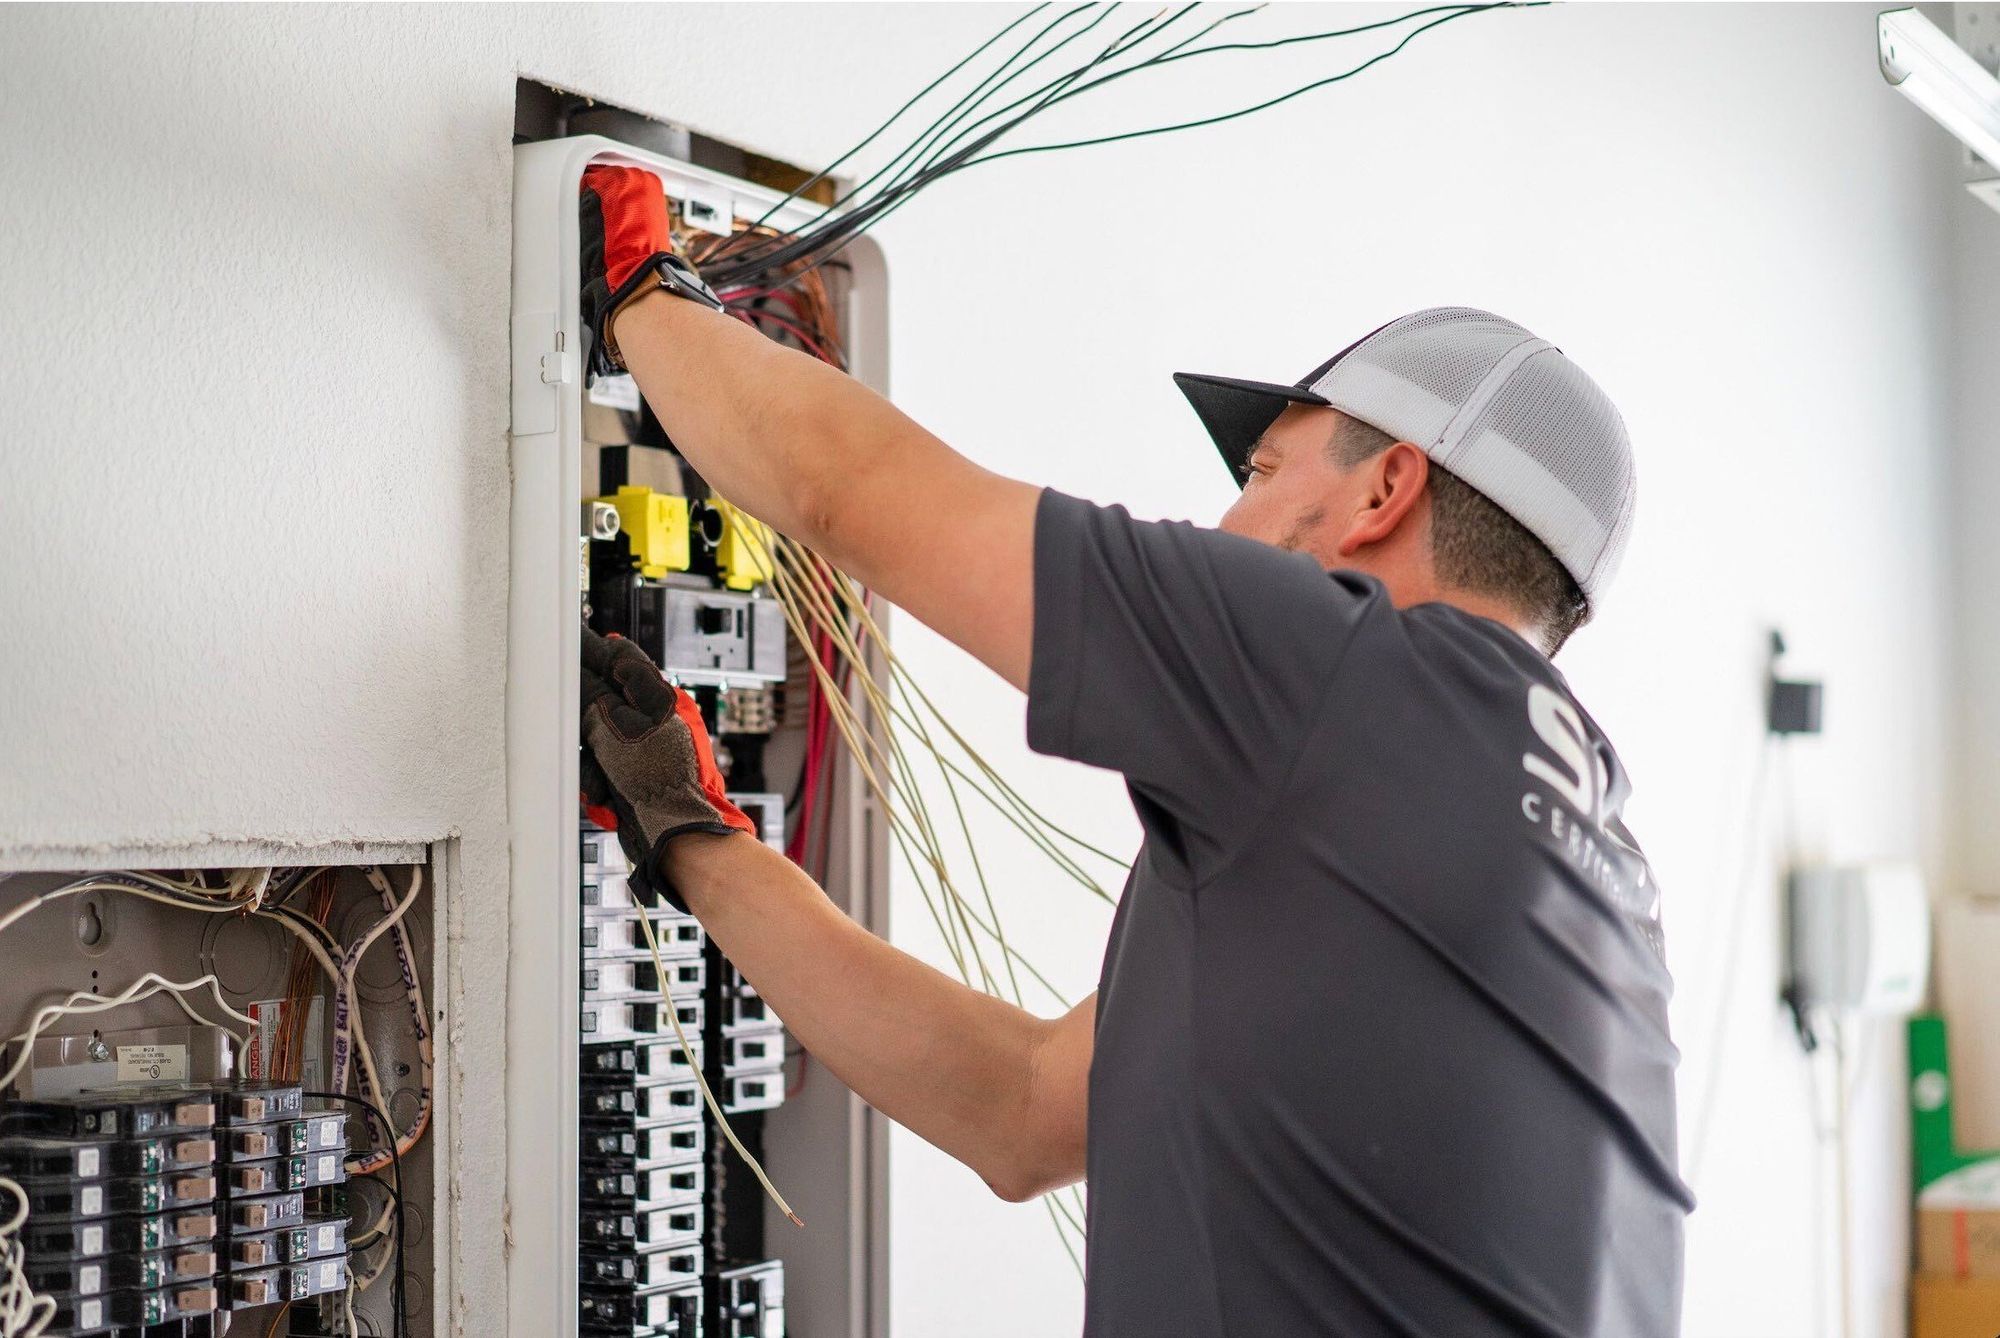 Emergency Electrical Issues & Services Every Homeowner Should Know